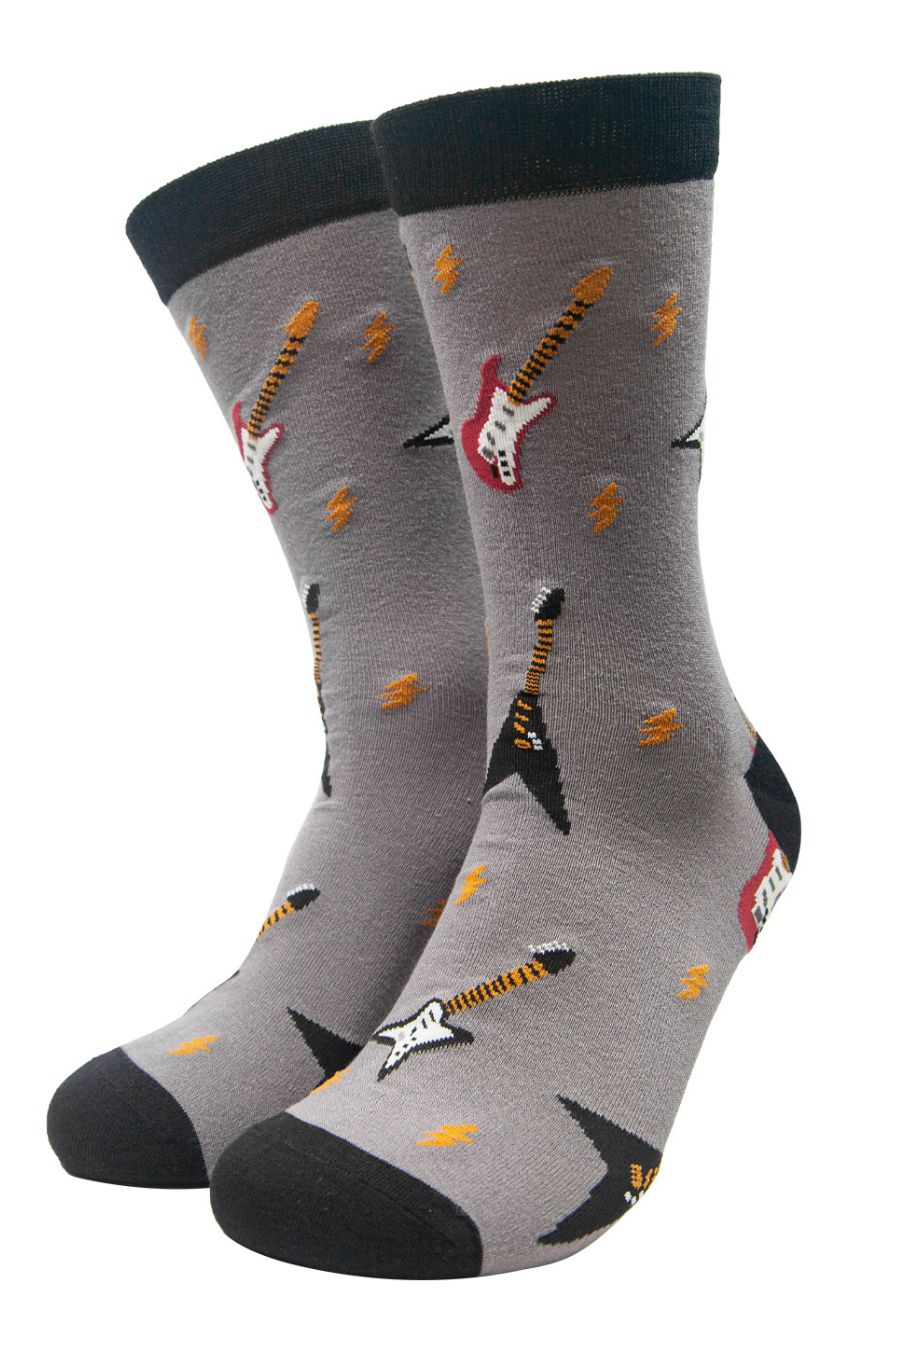 grey dress socks with electric guitars and lightning bolts